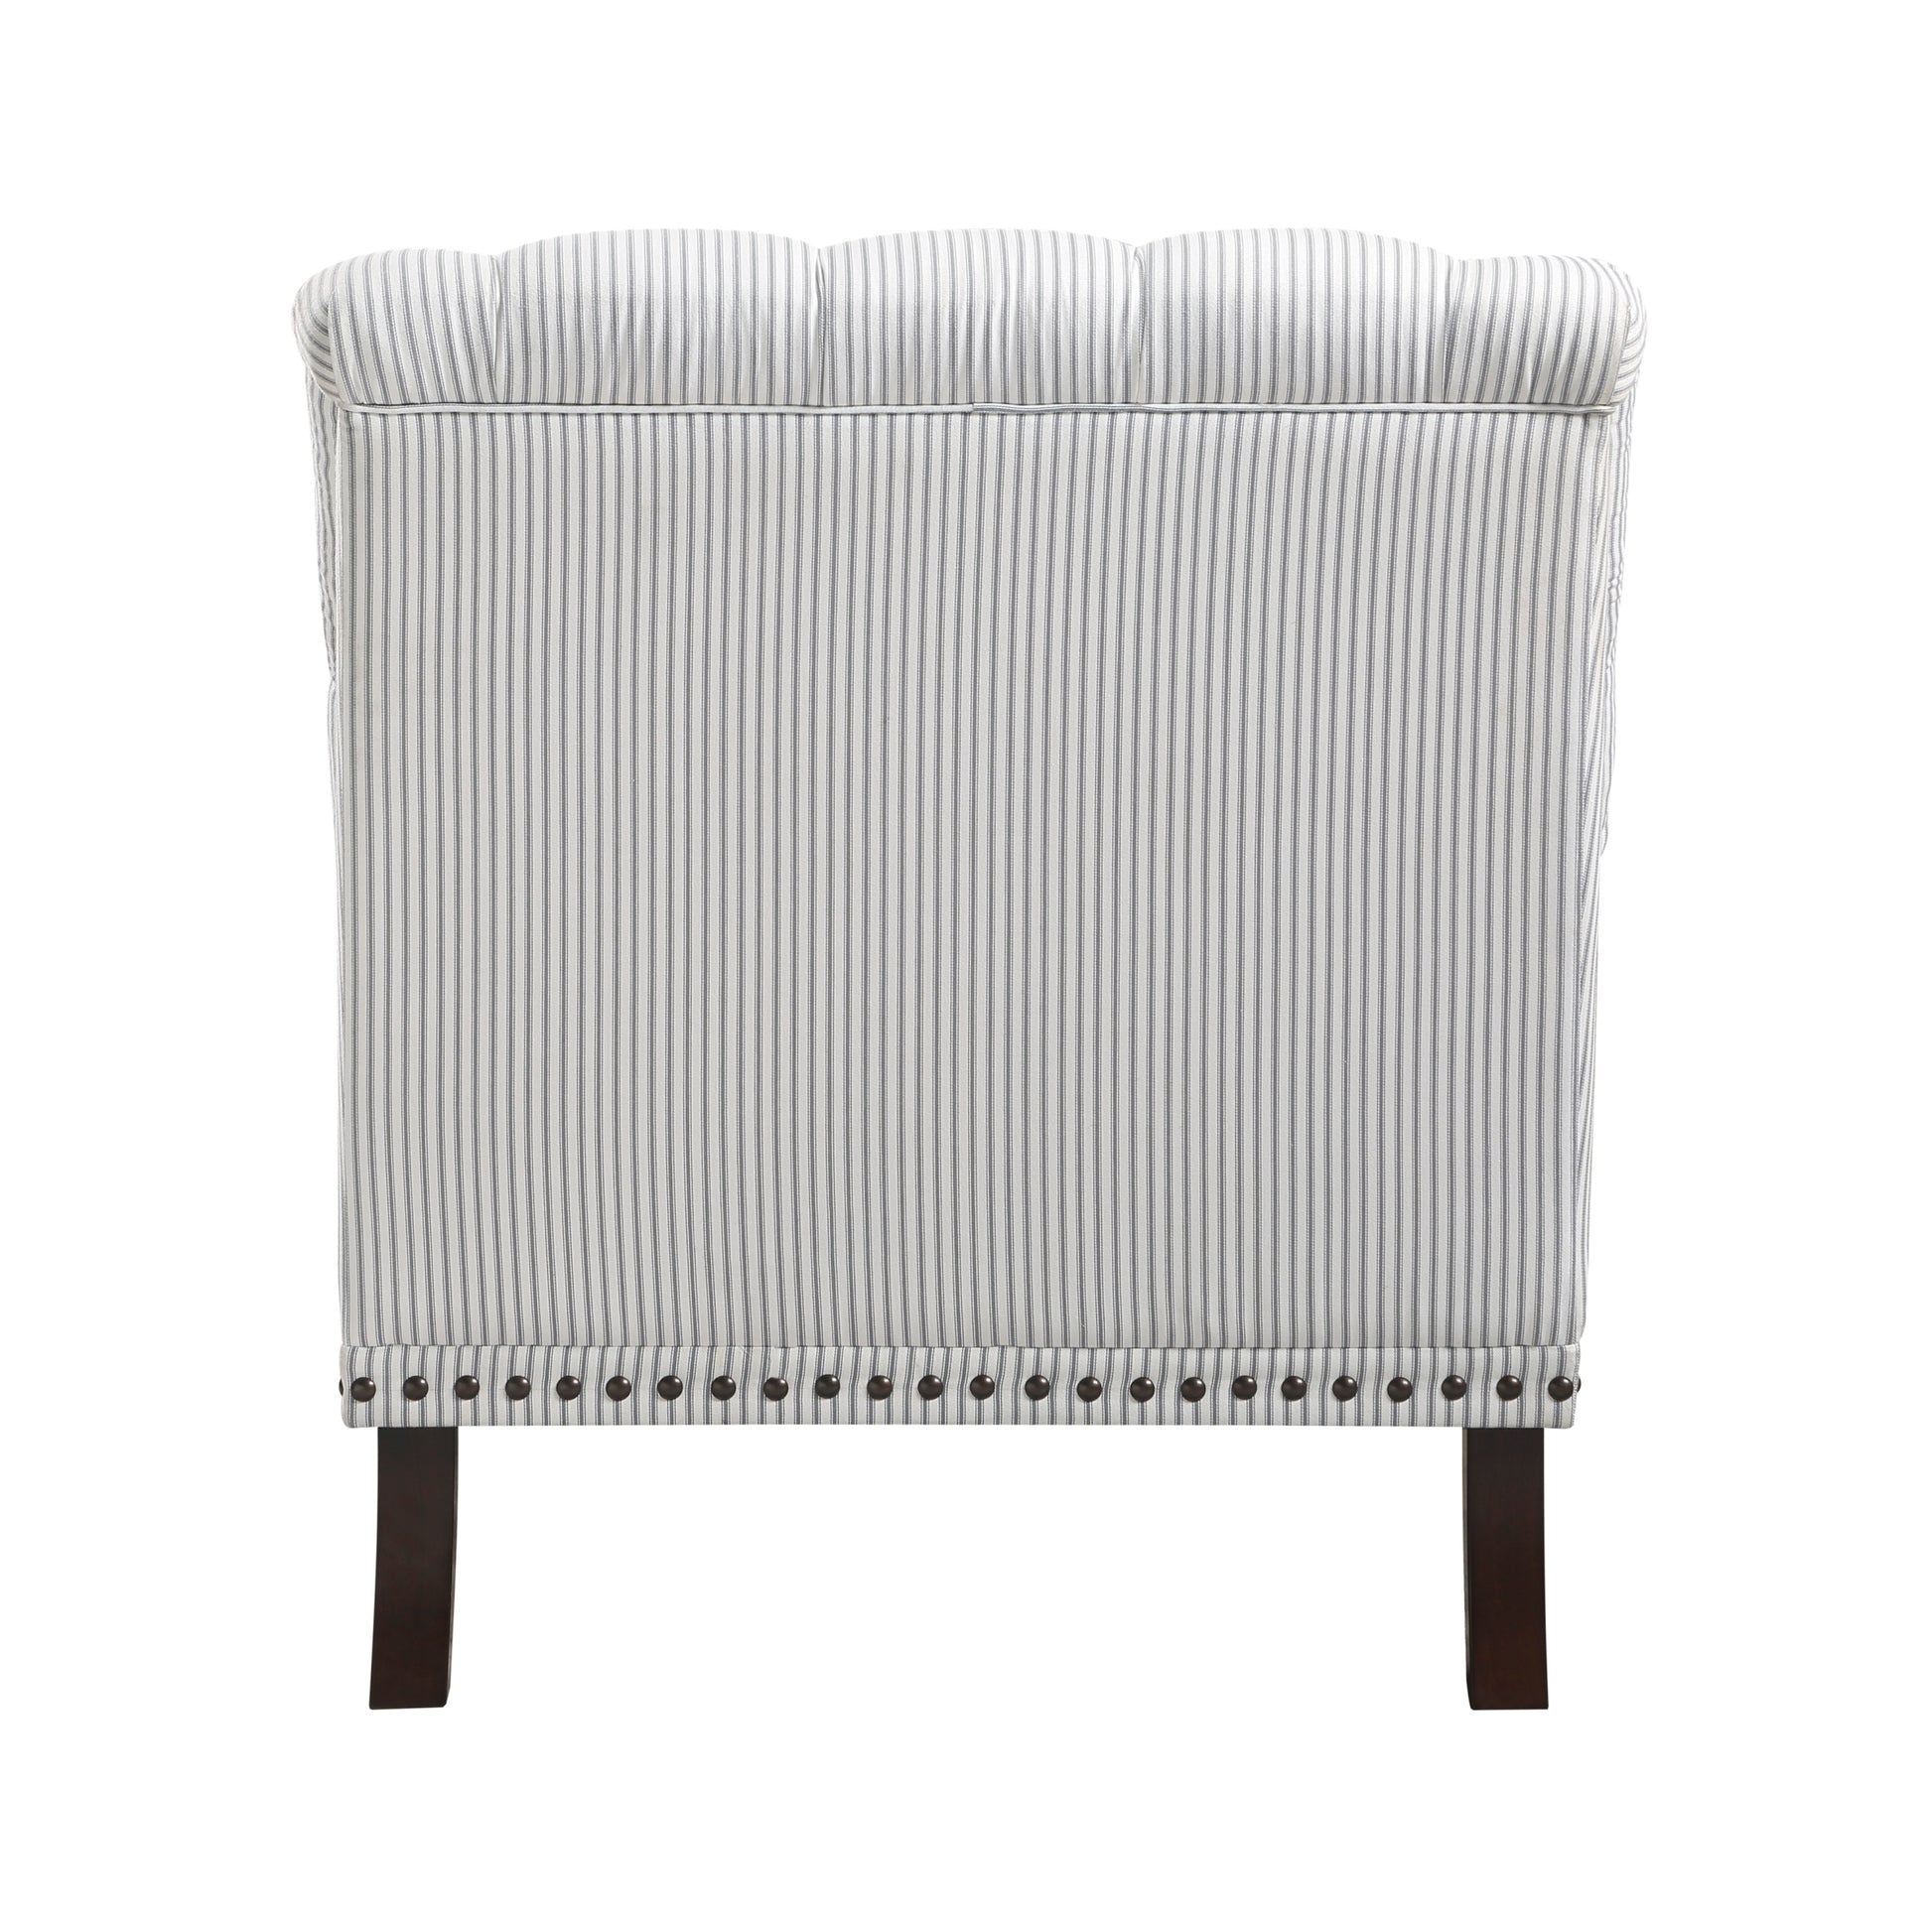 Luxurious Living Room Accent Chair 1pc White Gray gray-primary living